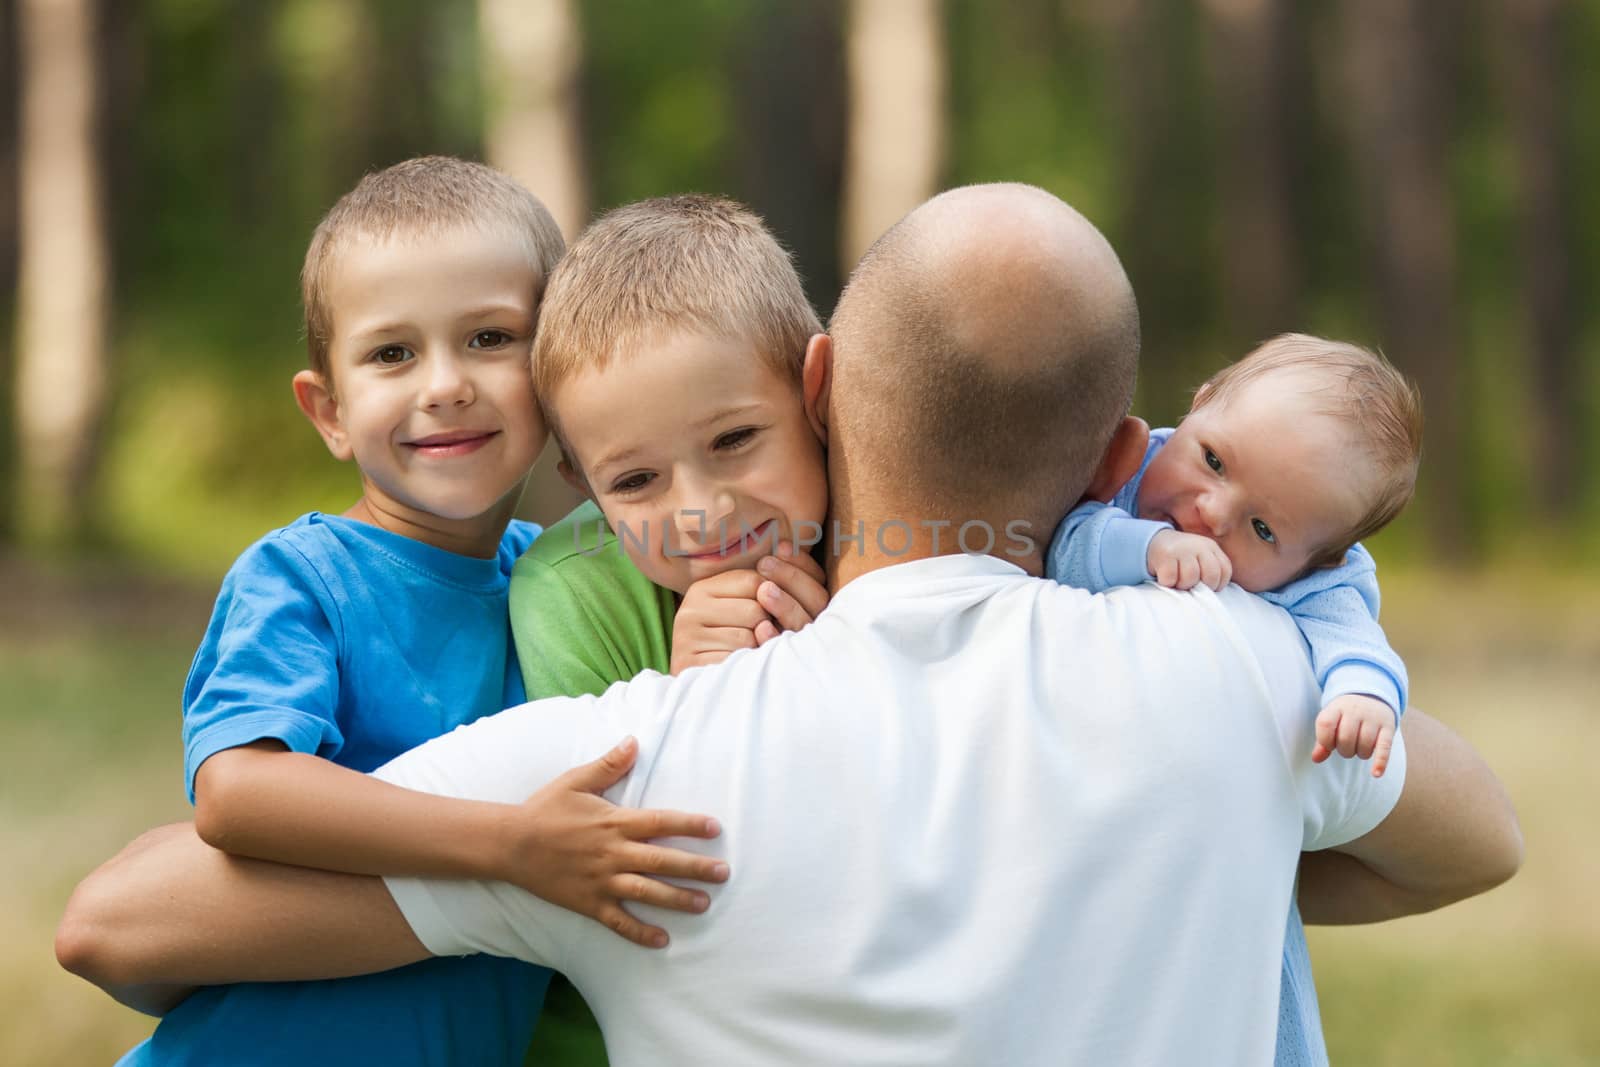 Family happiness - loving father bonding or holding little smiling sons and newborn baby